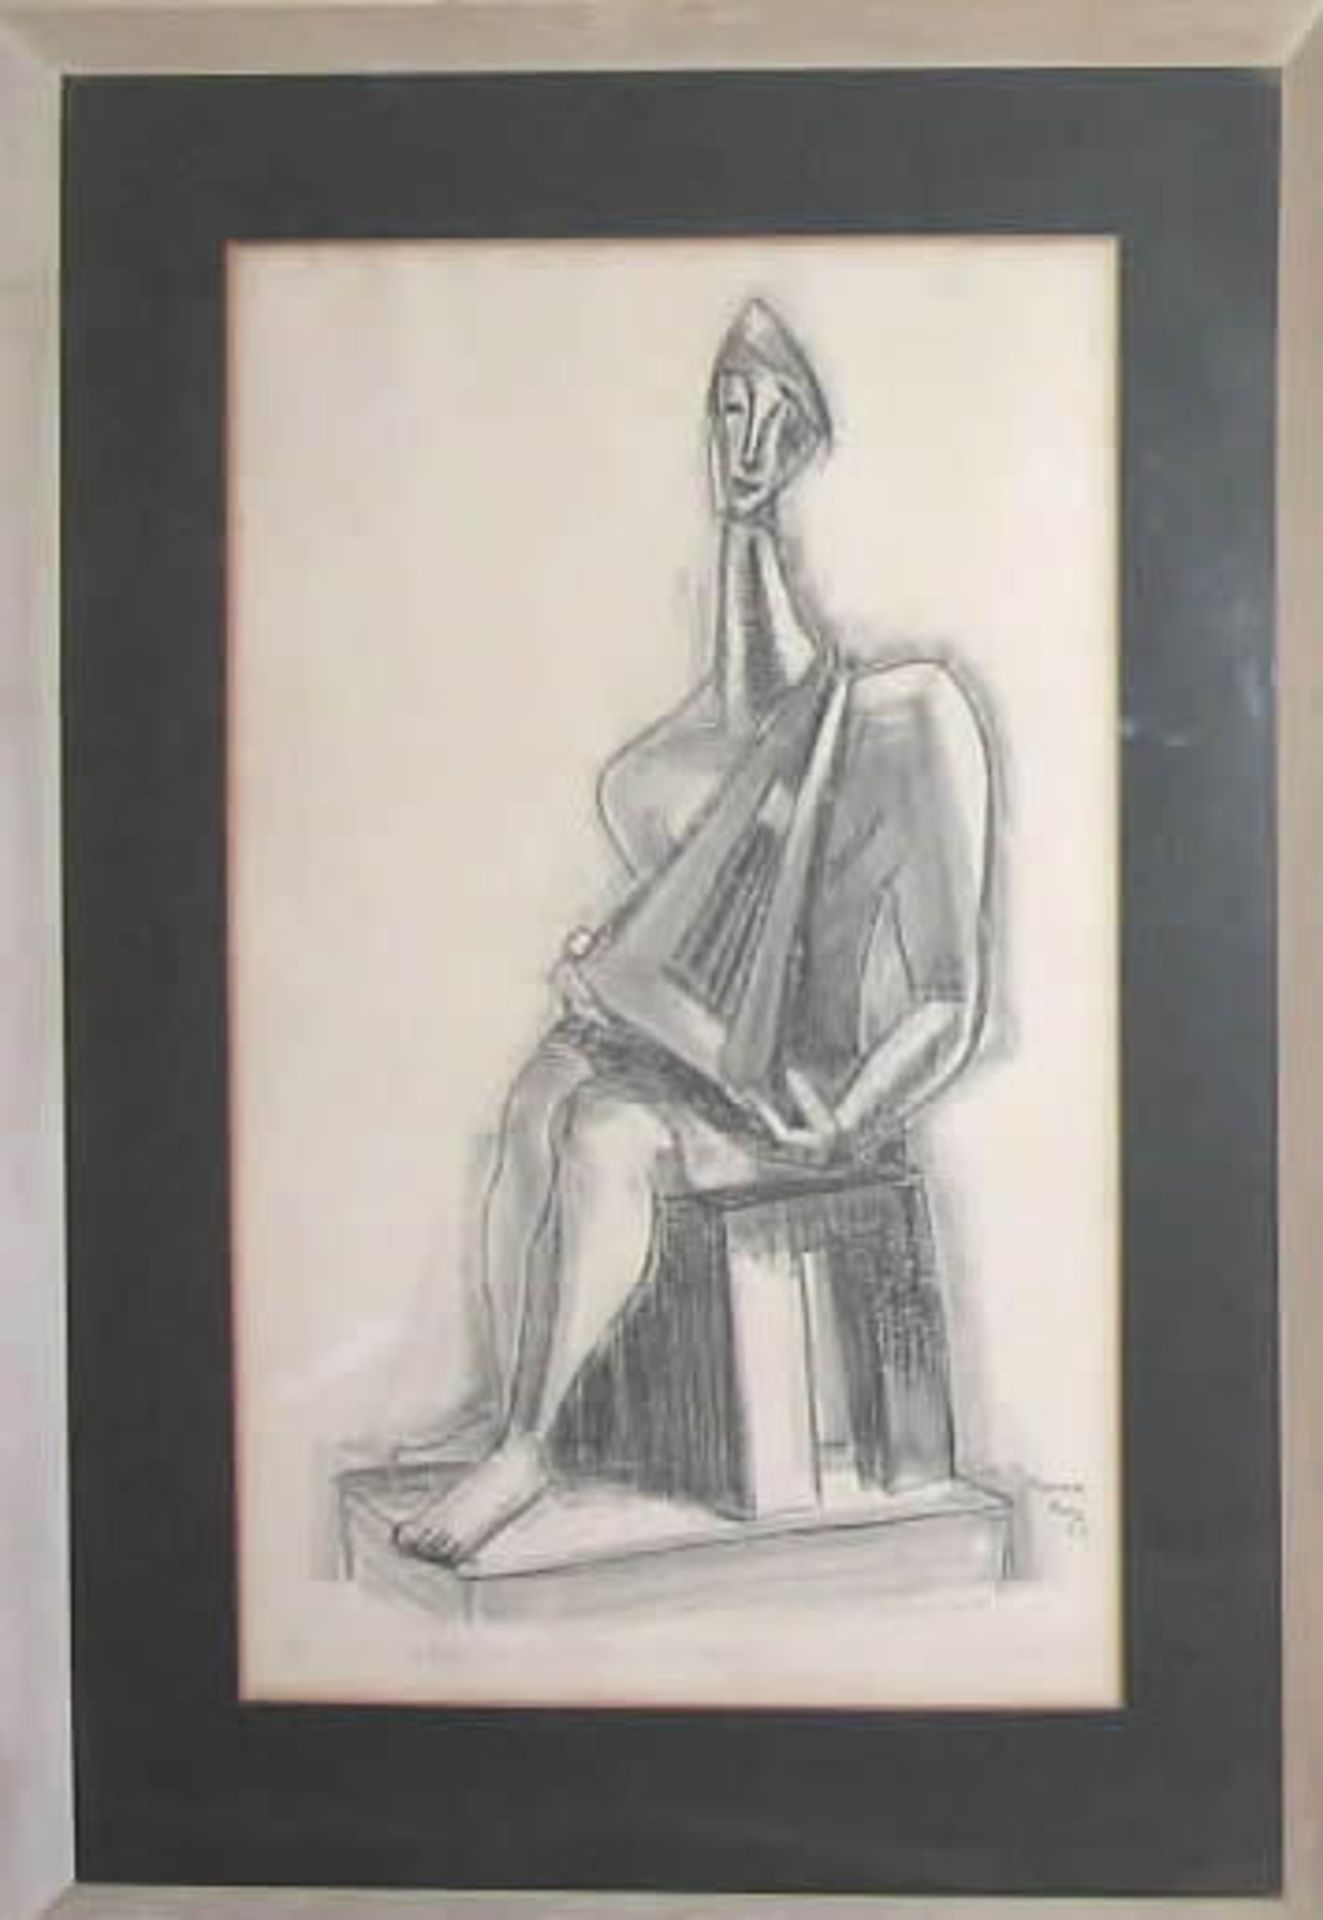 Seated figure with harp print 2/25. 84 x 58 cms, Condition: Good signed Marek Szwarc, March 1955,